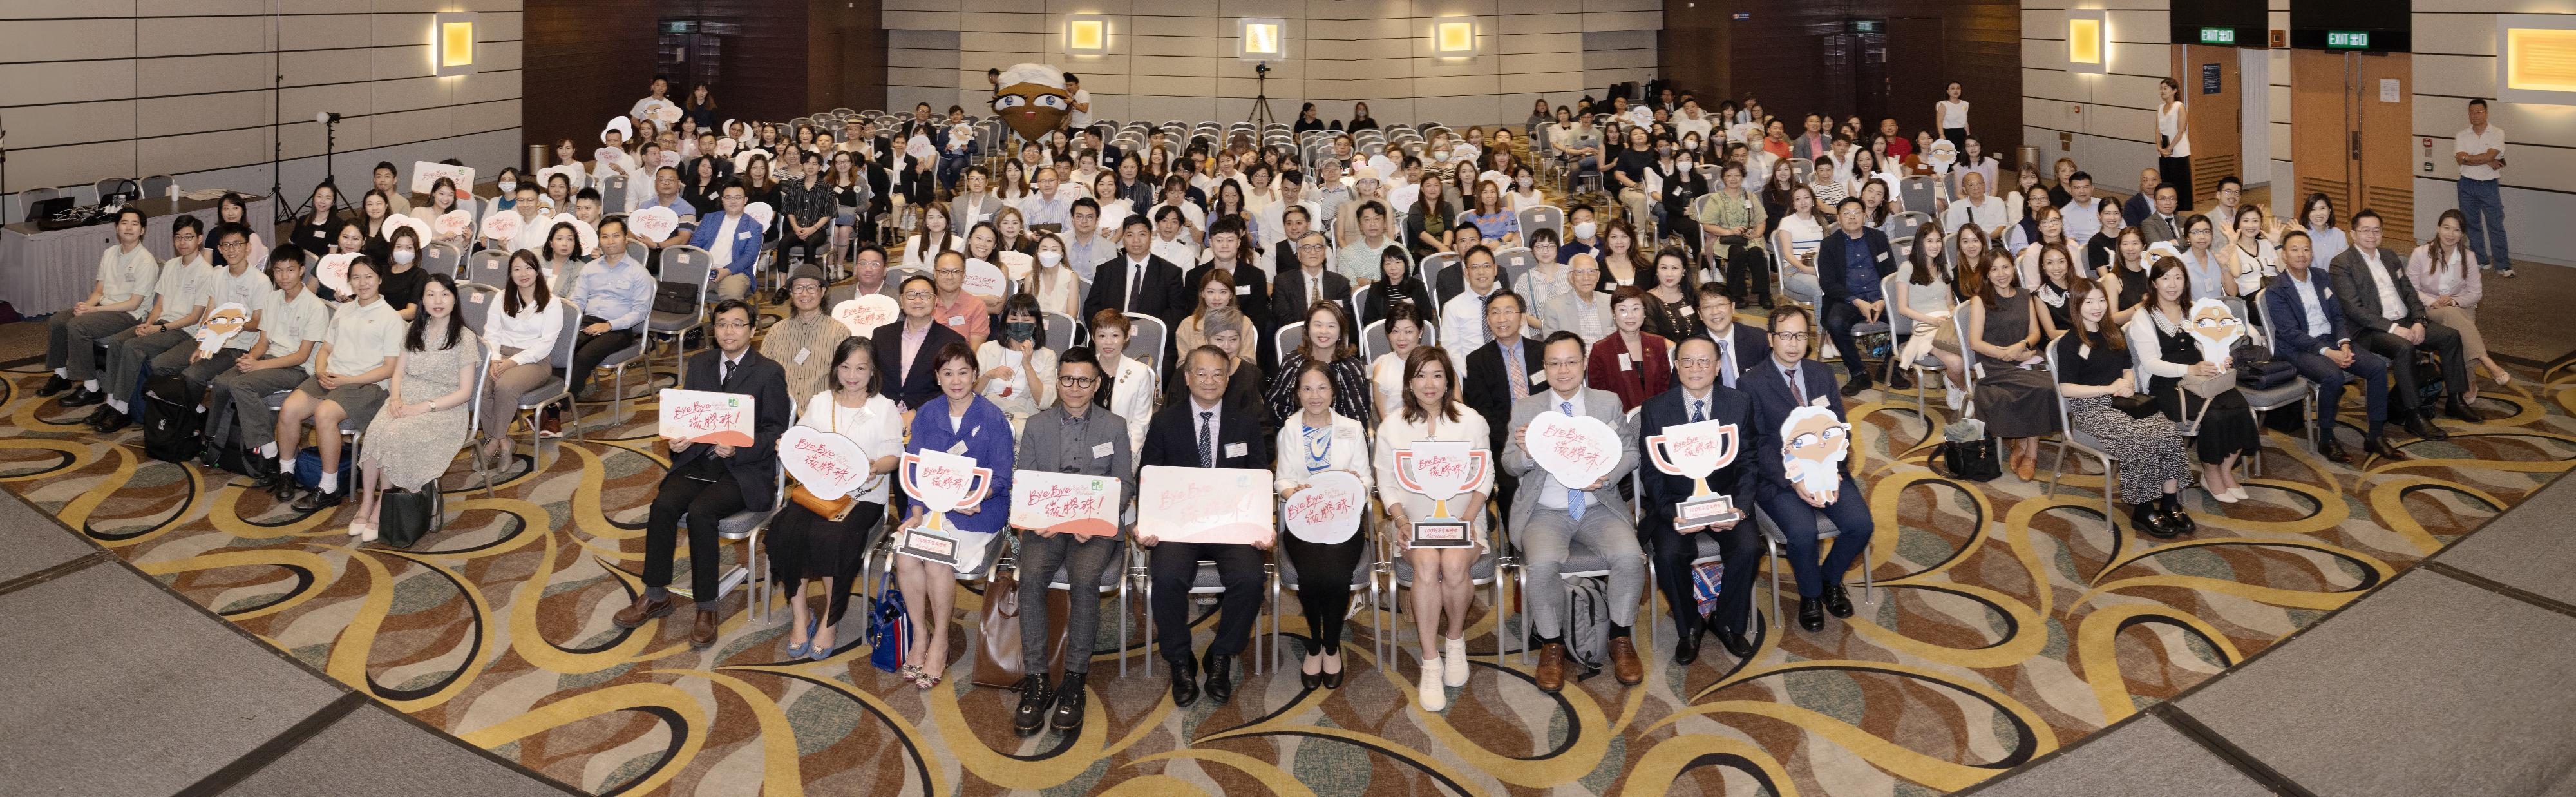 The Acting Secretary for the Environment and Ecology, Miss Diane Wong (front row, 10th right), and the Director of Environmental Protection, Dr Samuel Chui (front row, 11th left), are pictured with Charter participants at the award ceremony for the Bye Bye Microbeads charter today (August 8).